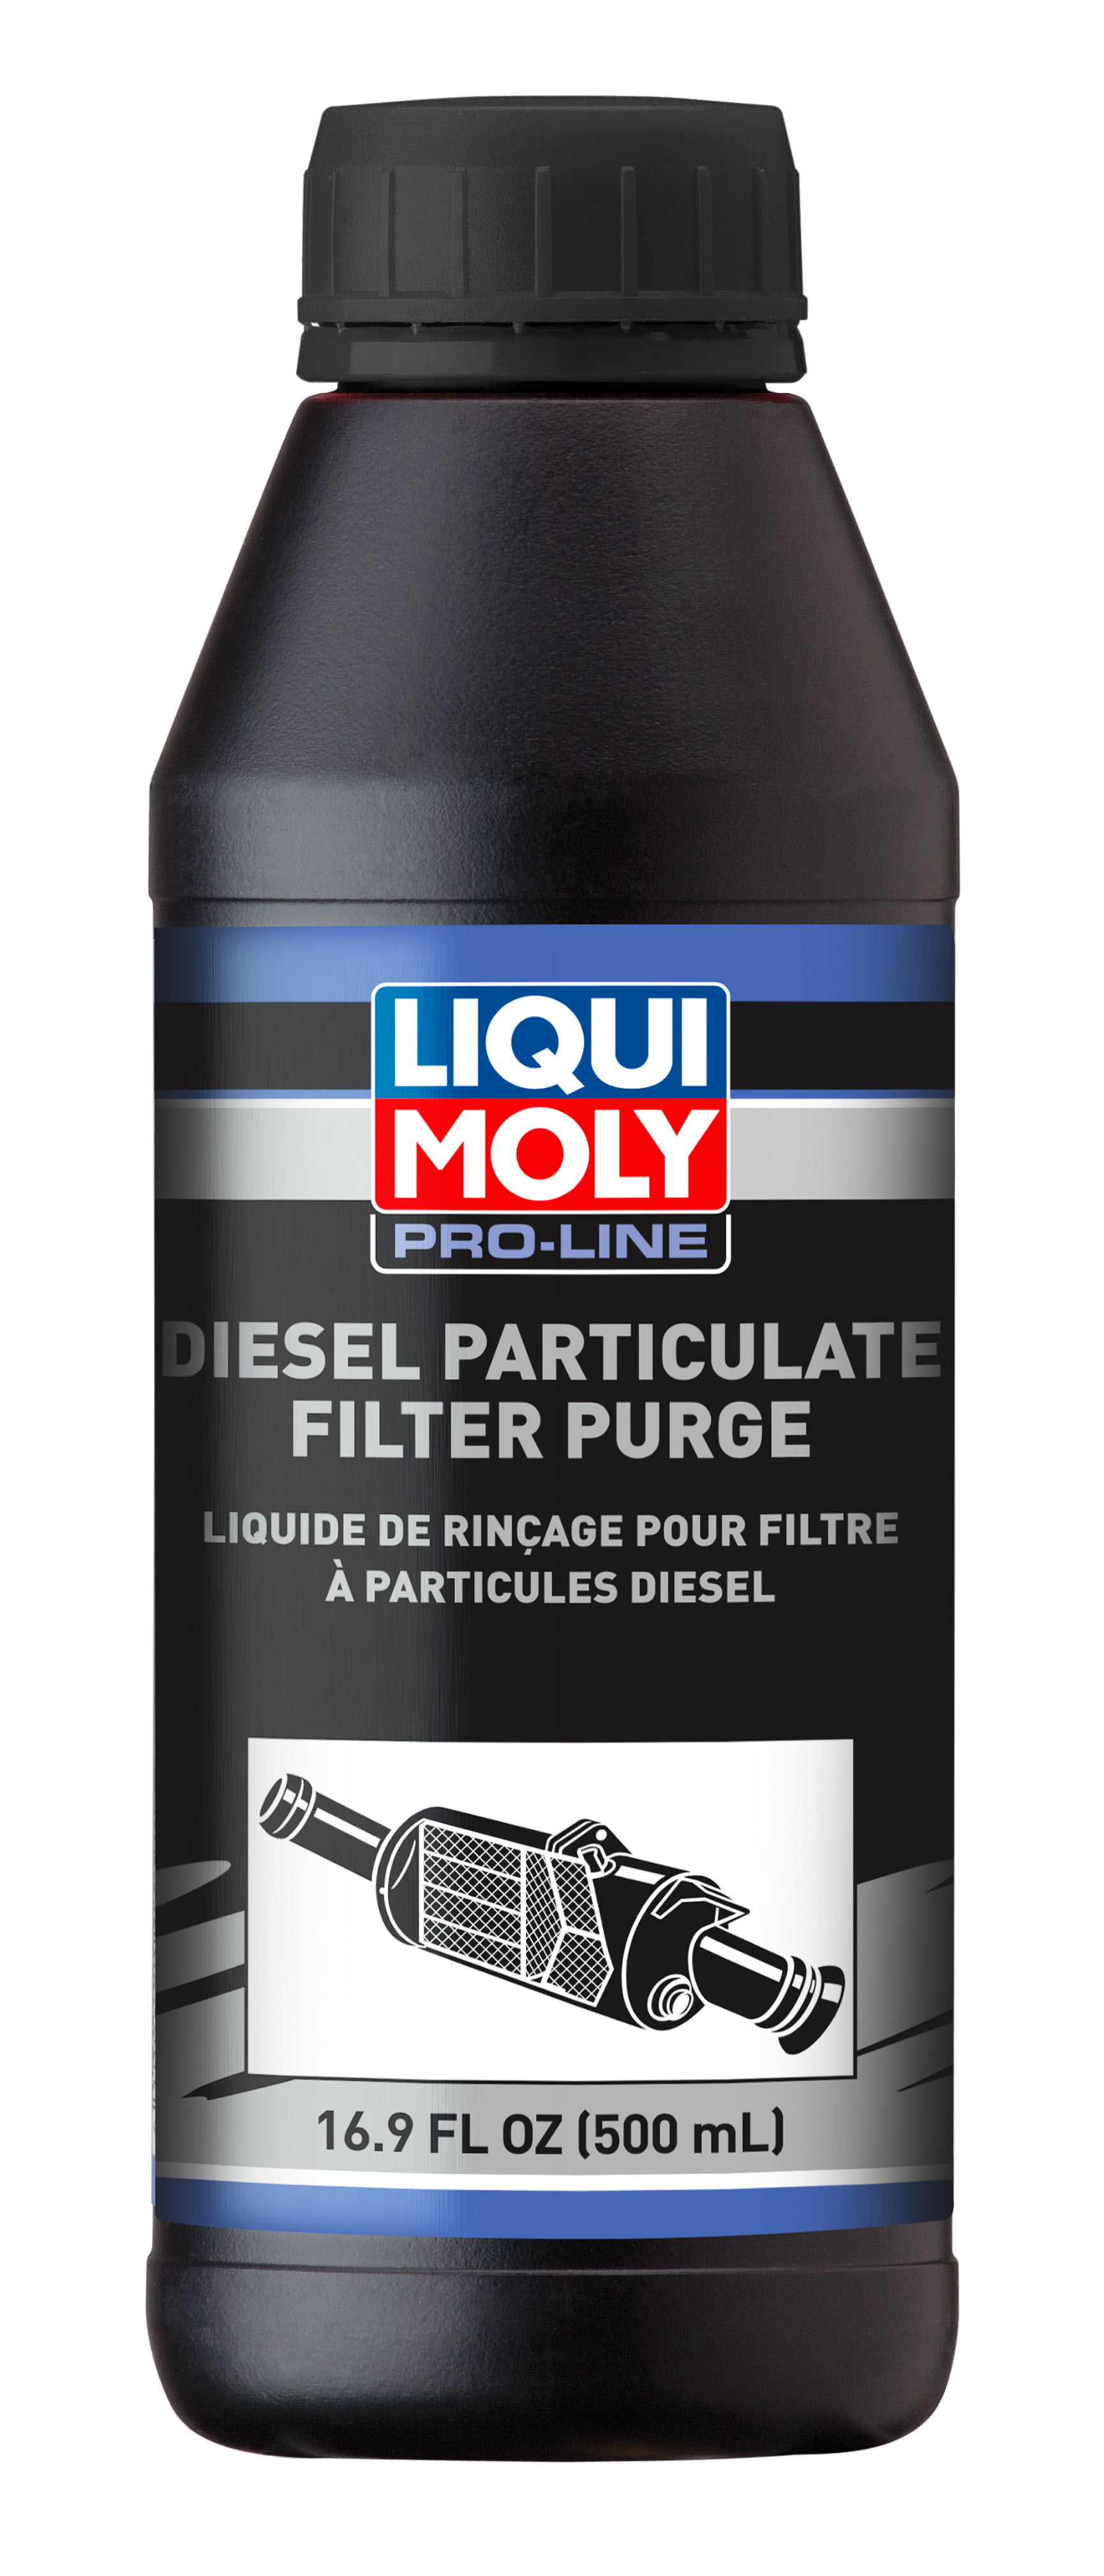 Show details for LIQUI MOLY 20112 Pro-Line Diesel Particulate Filter Purge - 500 Ml Can